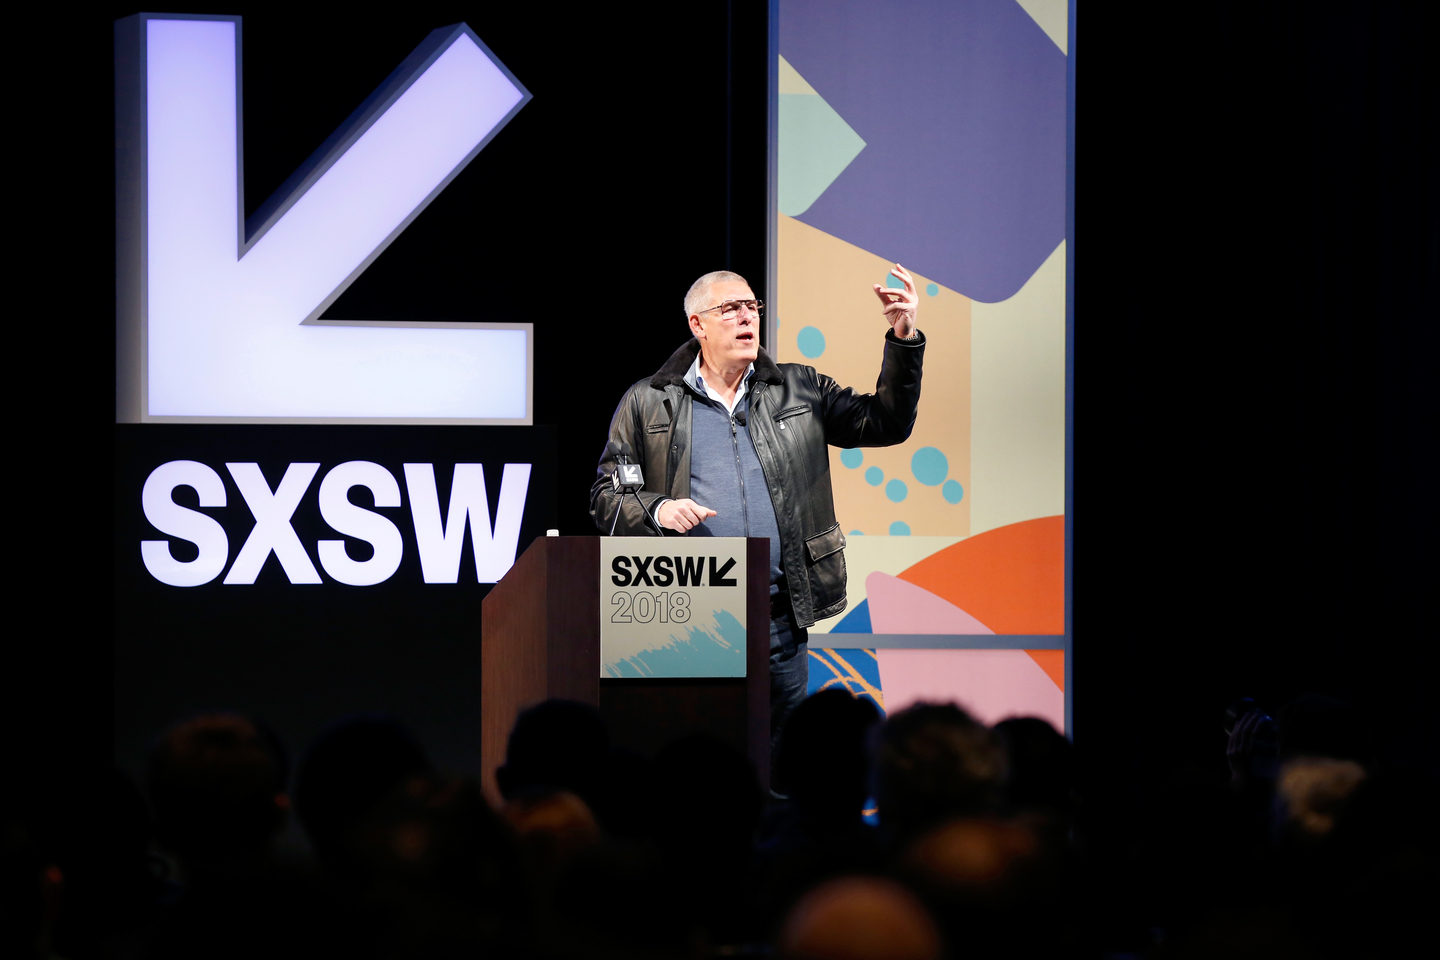 SXSW Music Keynote: Lyor Cohen. Photo by Sean Mathis/Getty Images for SXSW